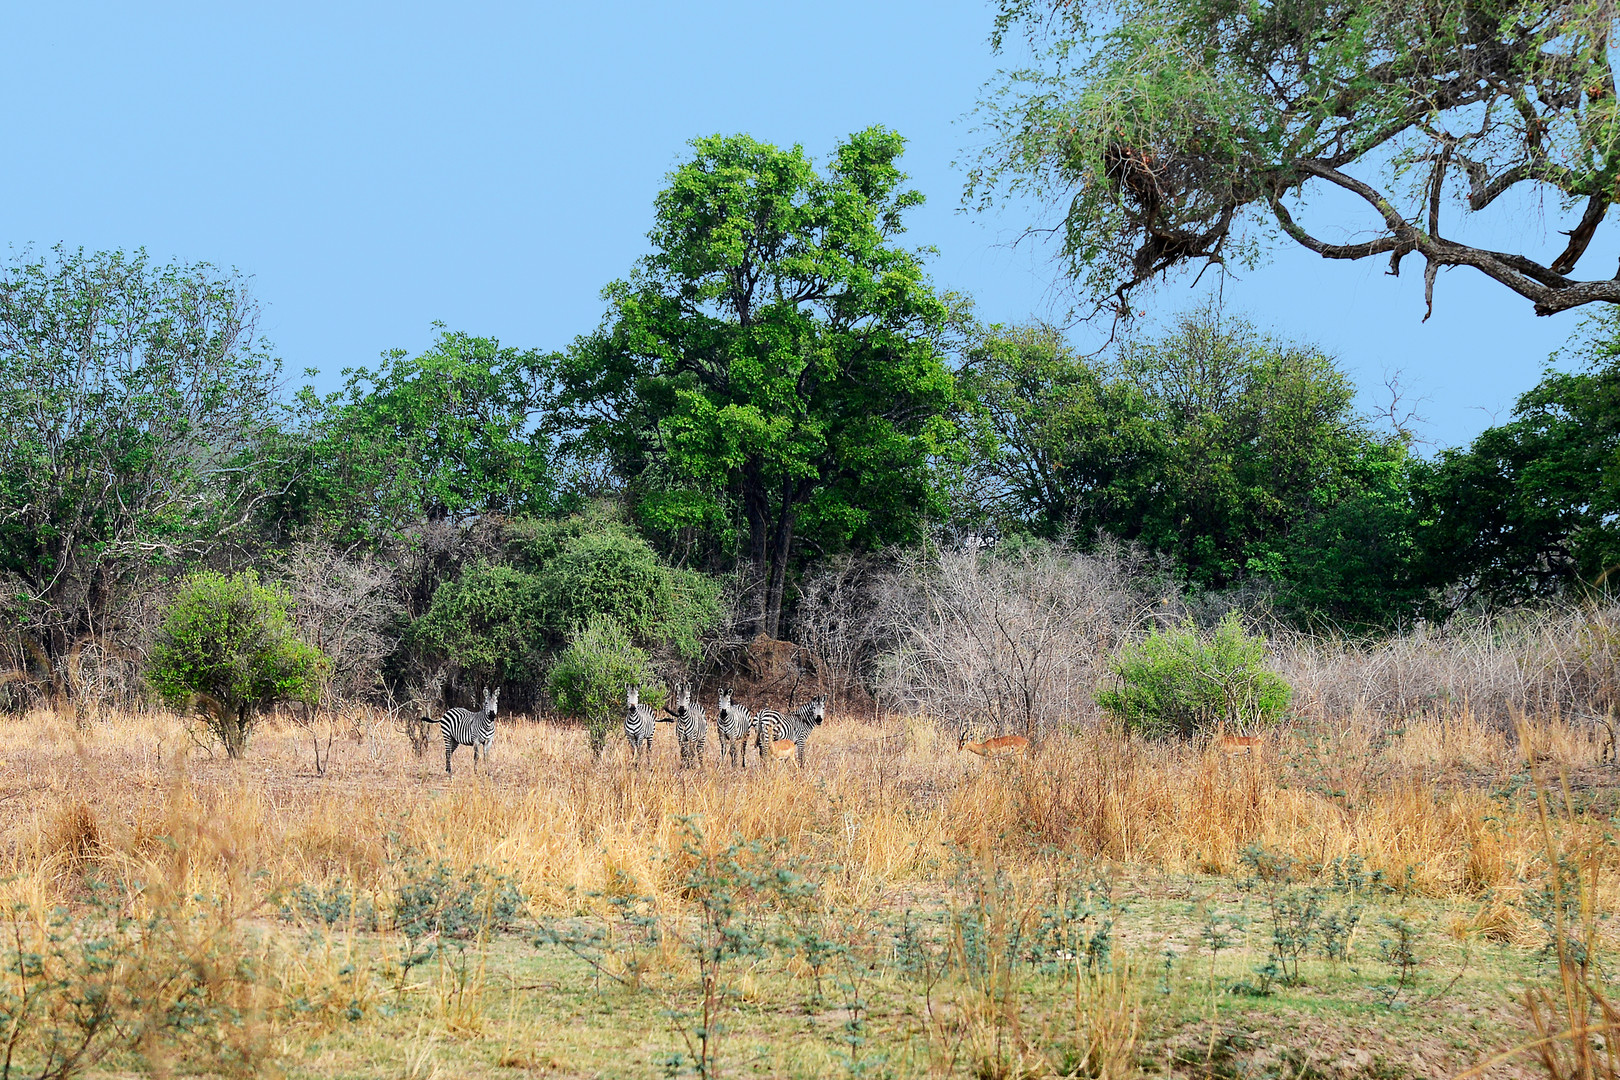 Grass, trees and a few zebras